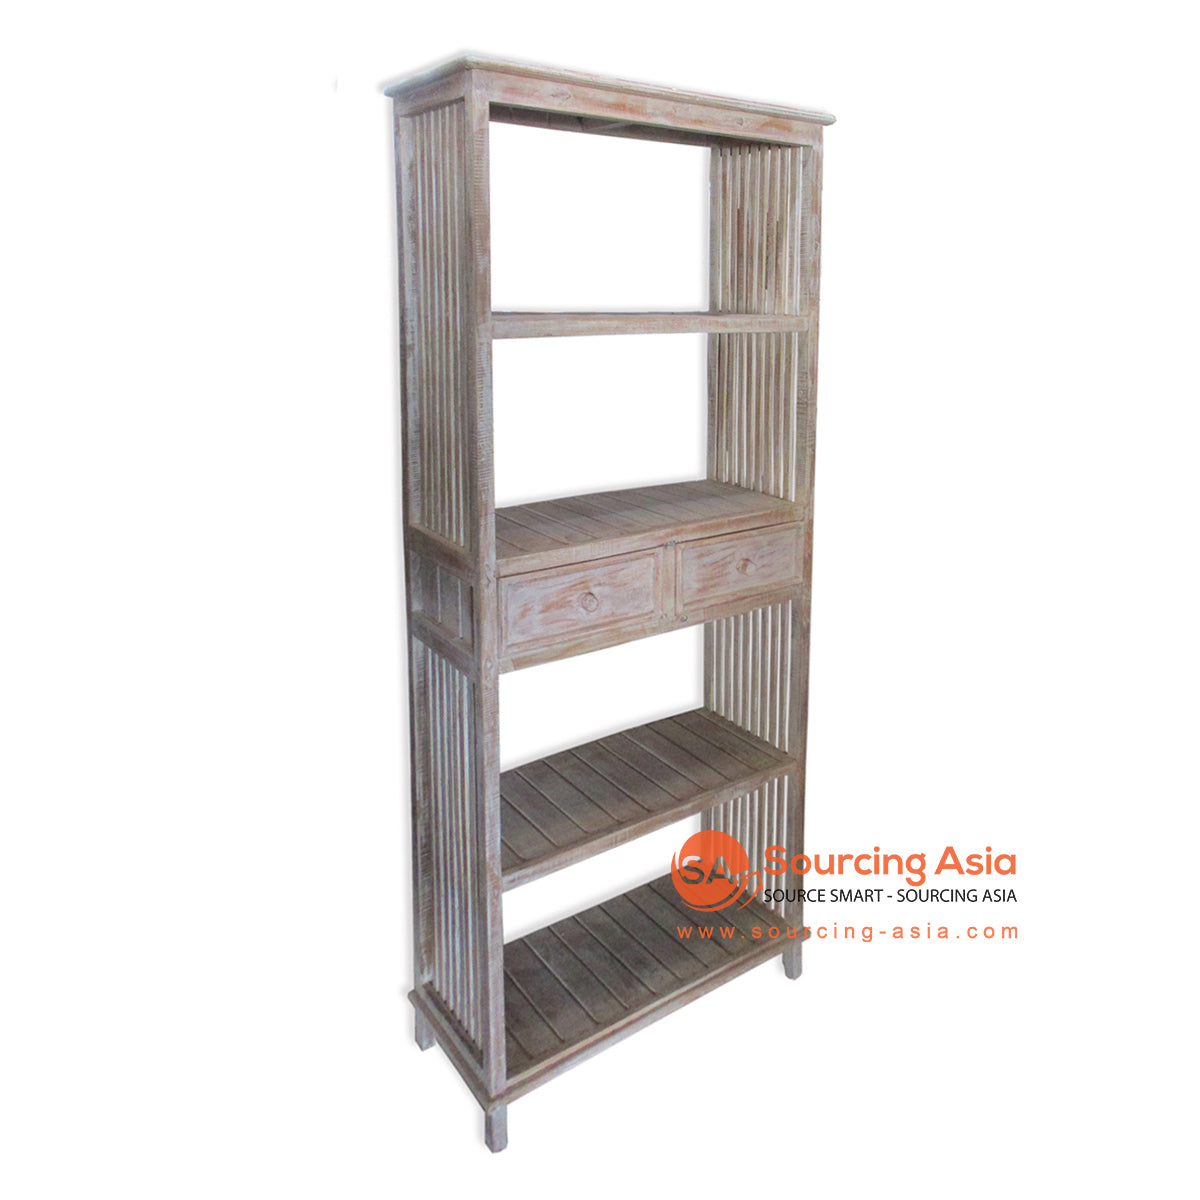 THE138BW BROWN WASH WOODEN BOOK RACK WITH TWO DRAWERS AND FOUR SLOTS